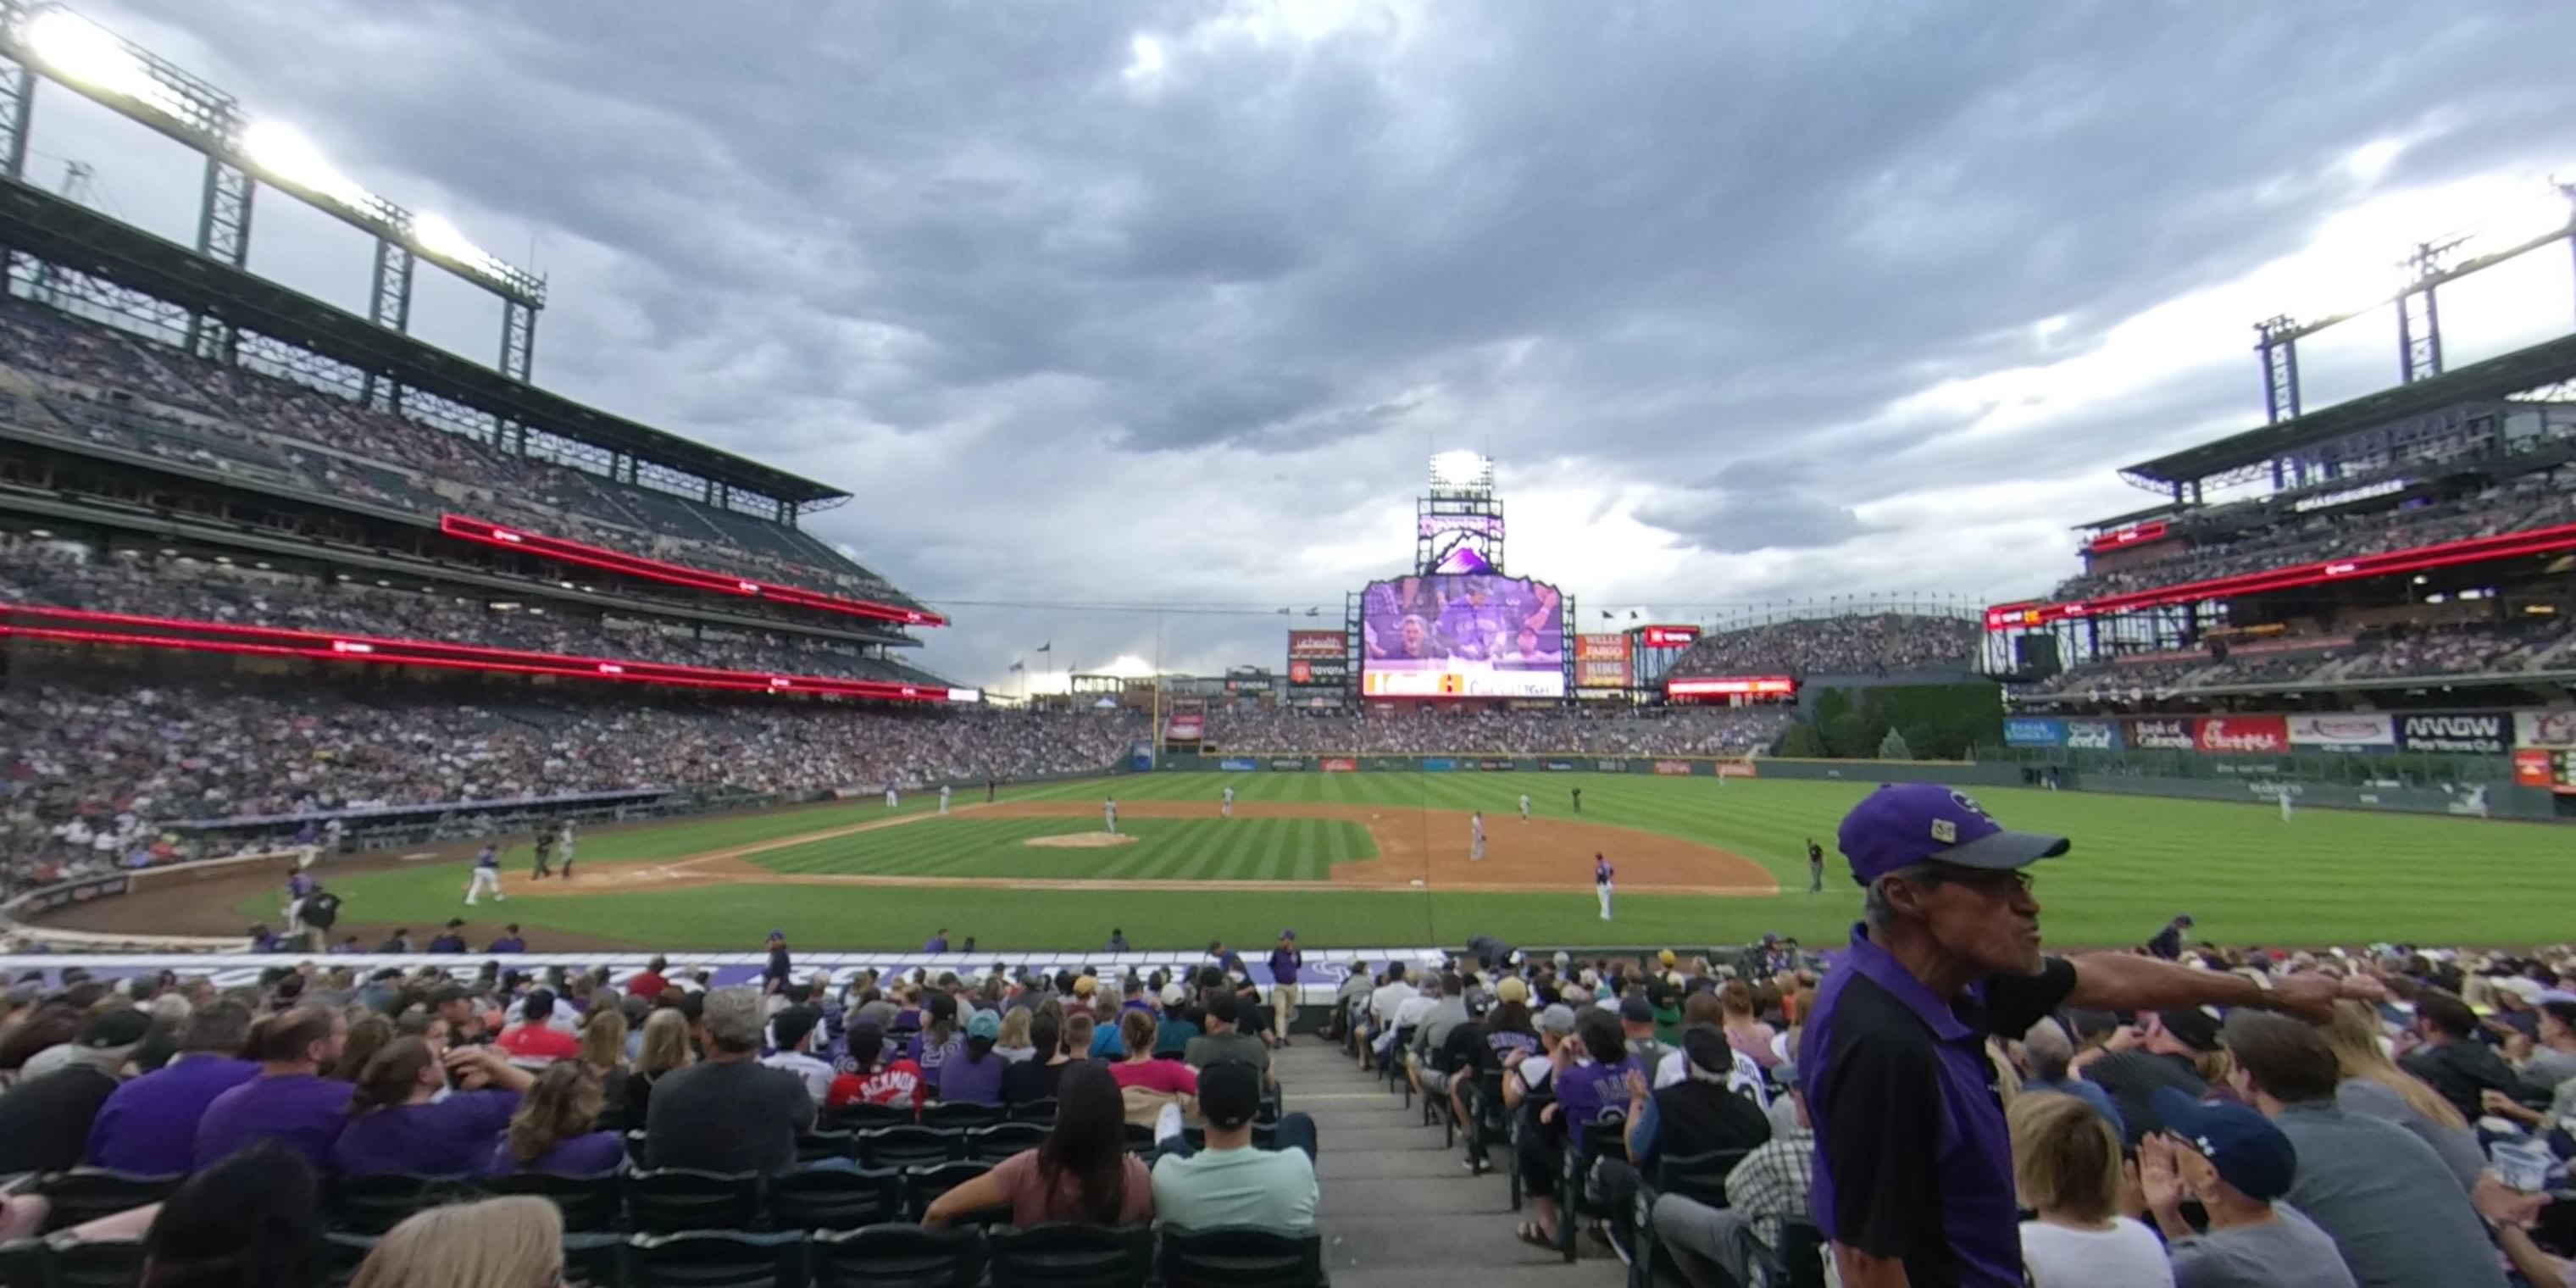 section 122 panoramic seat view  - coors field